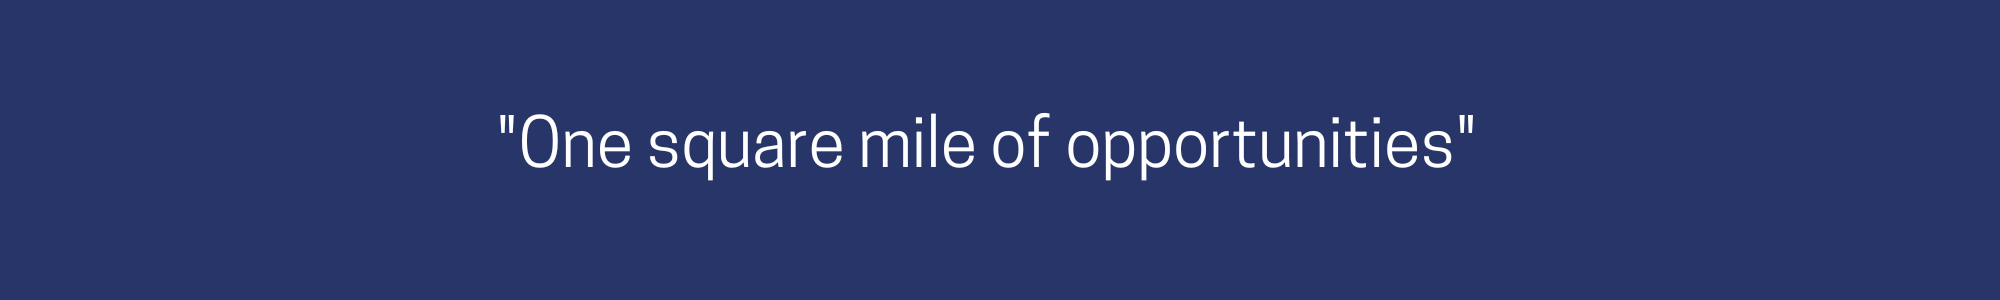 "One square mile of opportunities"  